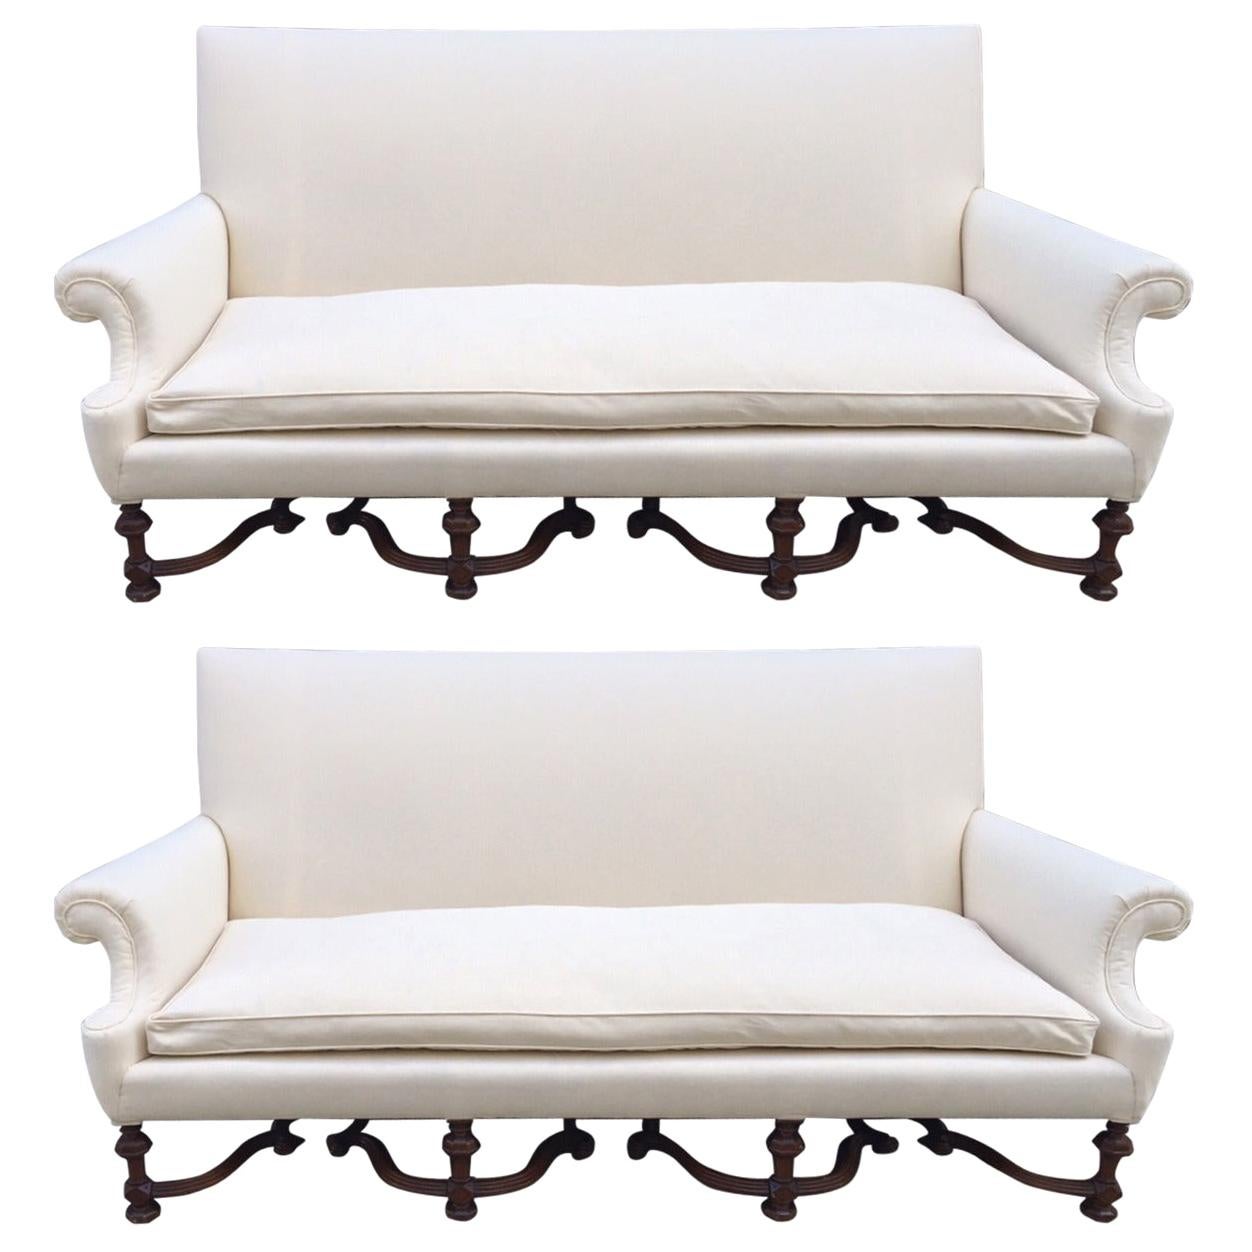 Pair of English High Back Antique Walnut Sofas in Linen For Sale